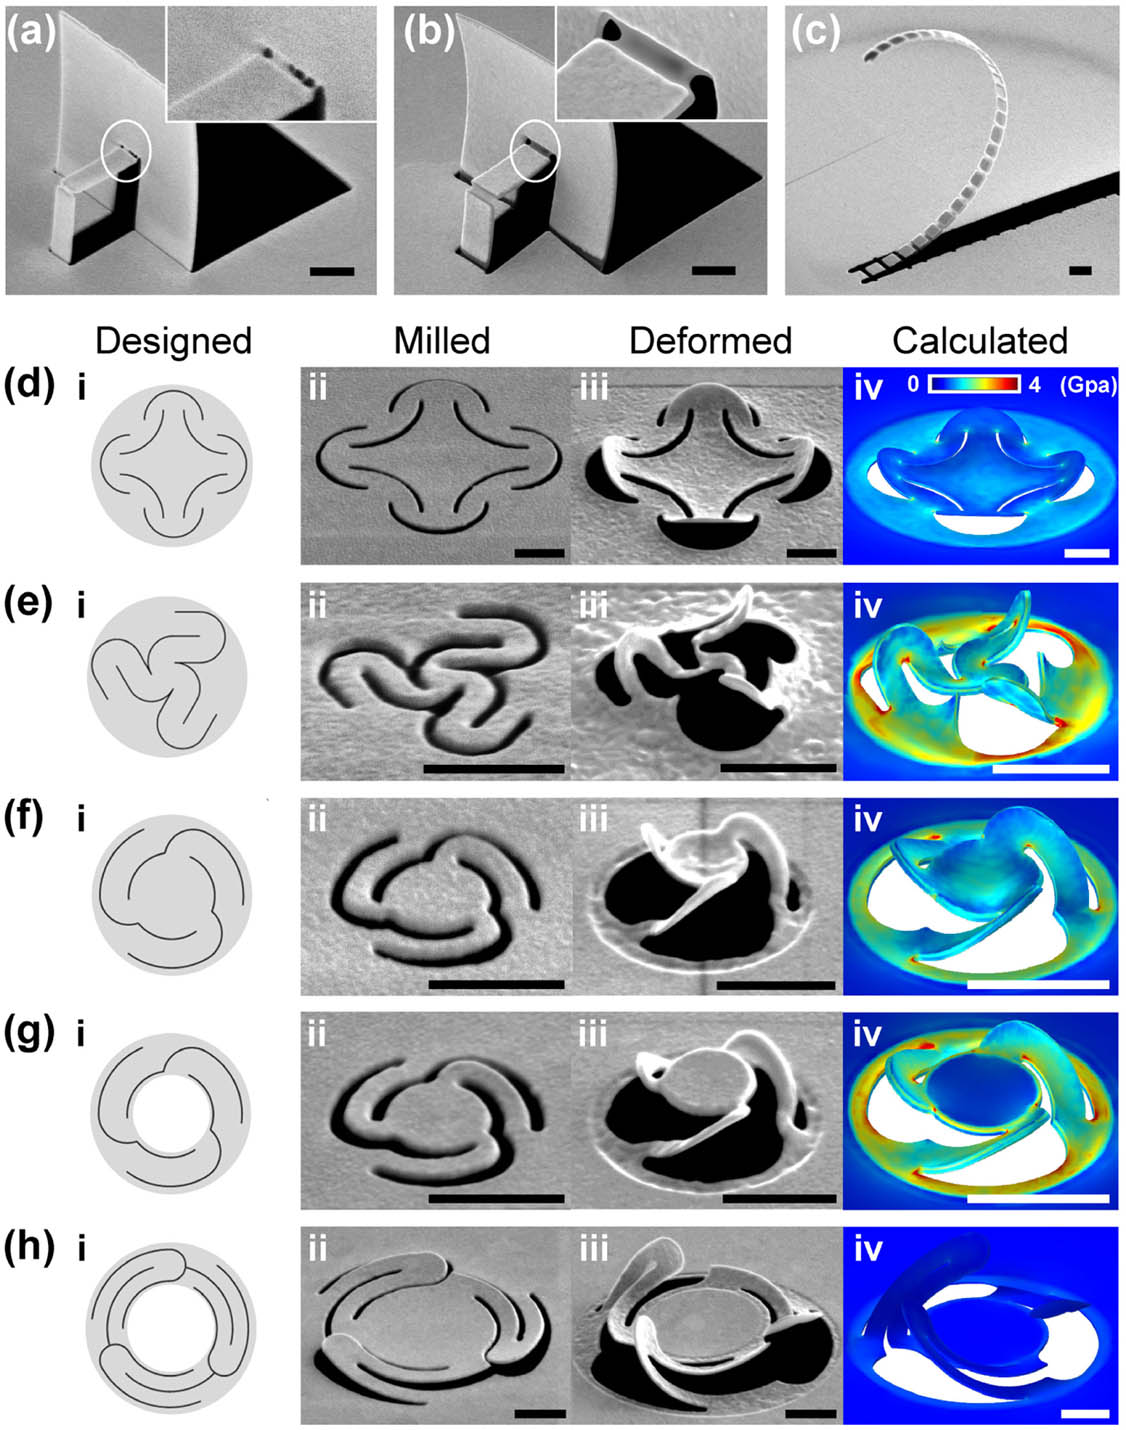 (a), (b) SEM images of a pop-up plate structure fabricated by nano-kirigami on (a) an Au monolayer film and (b) an Au/SiN bilayer film. Insets show the zoom-in SEM image of the scanned line at the upper hinge. The inset of (a) shows a discontinuous boundary while the inset of (b) shows a clean cut and a smooth boundary. (c) A serial of gold plates isolated on a curved Au/SiN stripe. (d)–(h) (i) Designed and (ii) milled 2D patterns on Au/SiN bilayer films, as well as corresponding (iii) fabricated and (iv) calculated 3D nanostructures (with colors denoting the stress distributions), in different nano-kirigami schemes. (d) A symmetric flower-like structure under global irradiation. (e) A highly asymmetric three-arm pattern under global irradiation. (f) A three-arm pinwheel under global irradiation, showing curved deformation at the central part. (g) A three-arm pinwheel under Boolean irradiation, without any deformation in the central part. (h) A deformed mirror with three folded arms, with flat and large central part. The simulation results, with modified mechanical models, are in good agreement with the experimental results in all these five schemes. Scale bars: 1 μm.